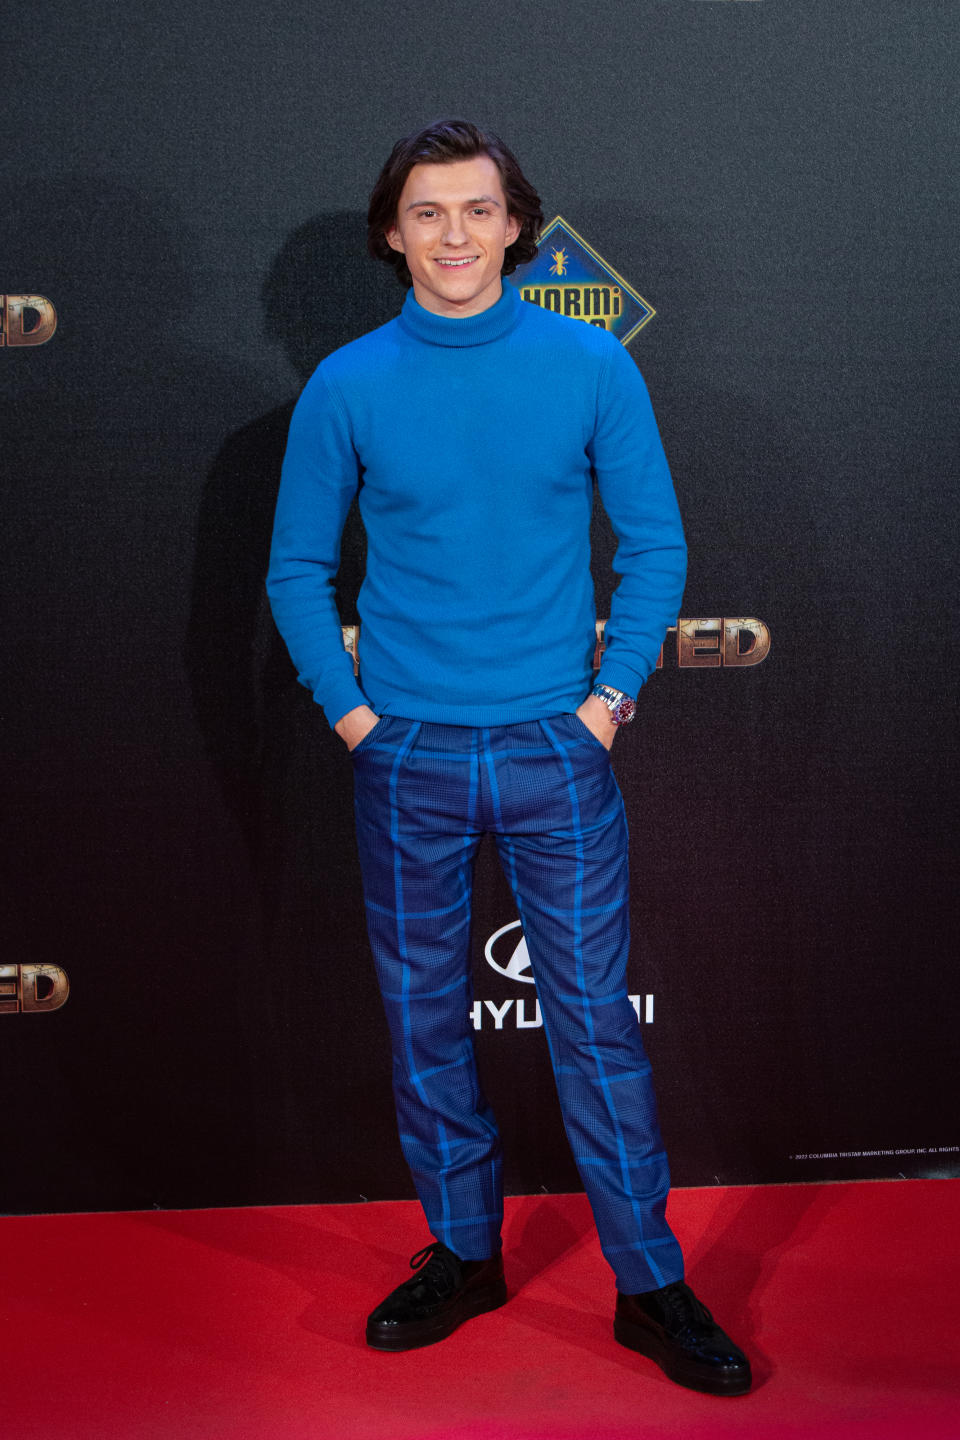 Tom Holland at the Uncharted premiere in Madrid. (Getty Images)